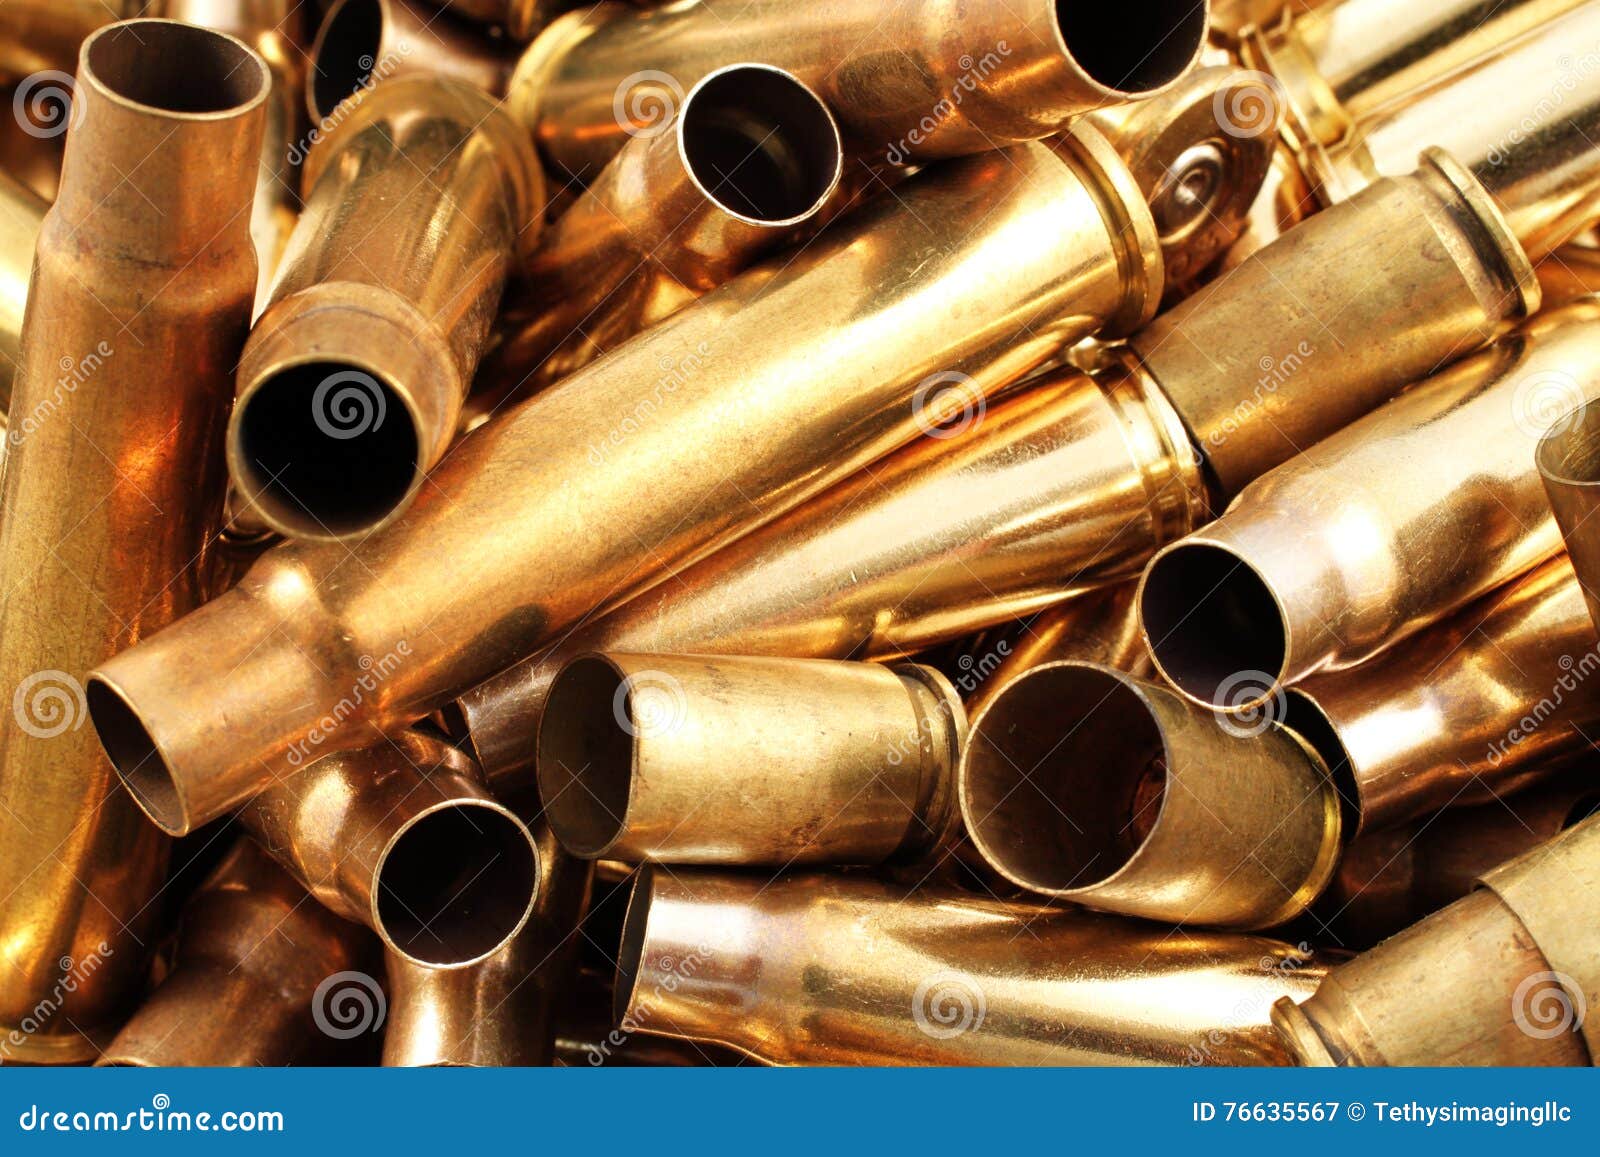 Empty Bullet Casings Close Up Stock Image - Image of casing, group